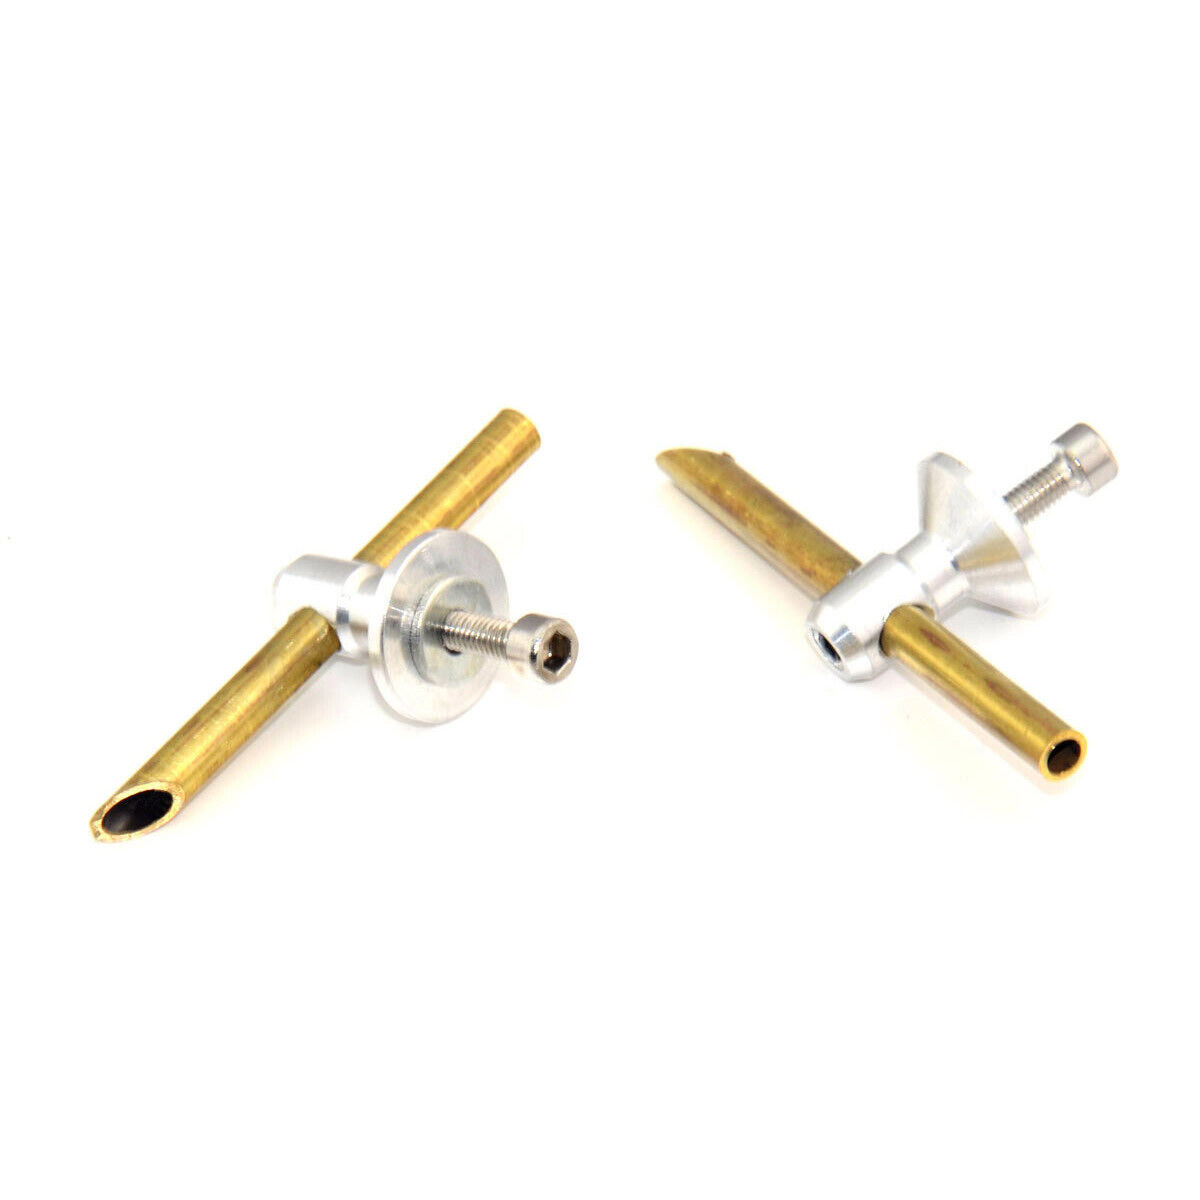 2x RC Boat Copper Stern Wiper Inlet Water Nozzle Cooling Spare Parts For RC Boat